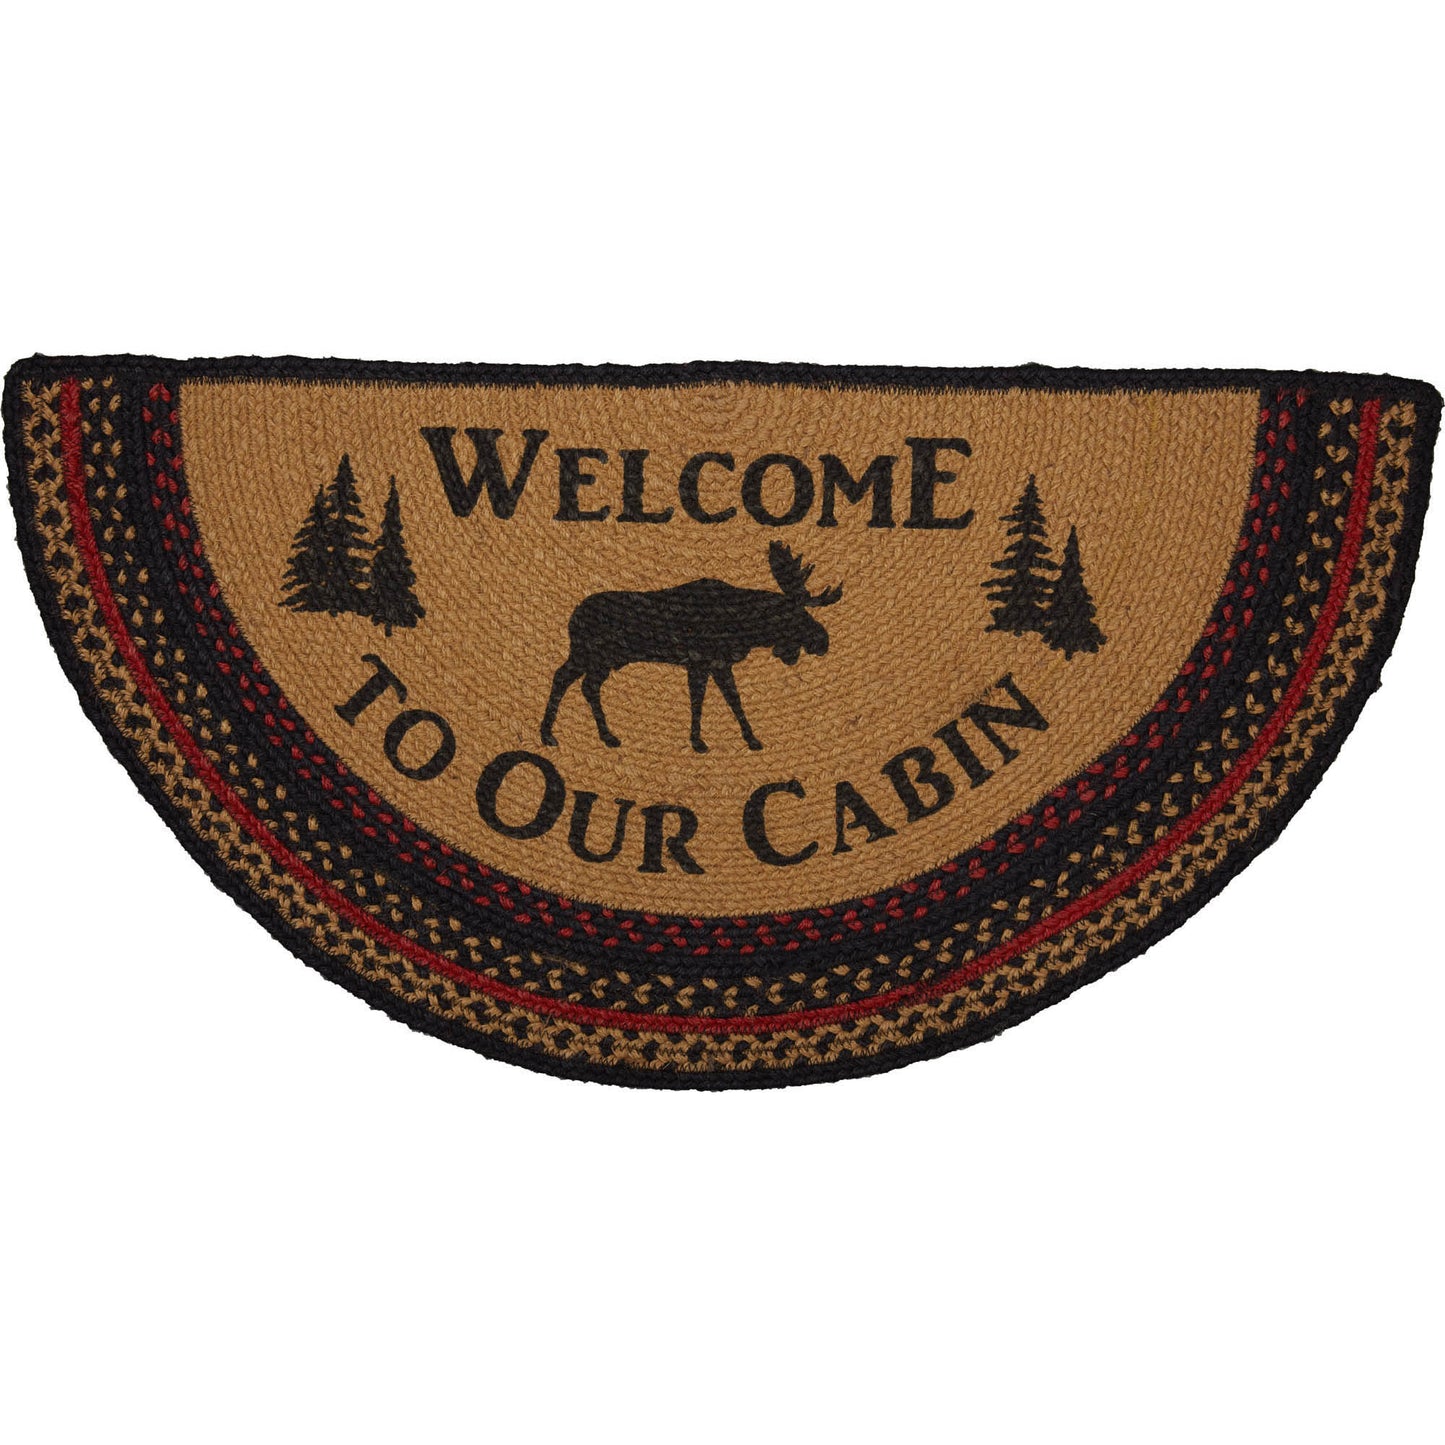 70193-Cumberland-Stenciled-Moose-Jute-Rug-Half-Circle-Welcome-to-the-Cabin-w-Pad-16.5x33-image-1